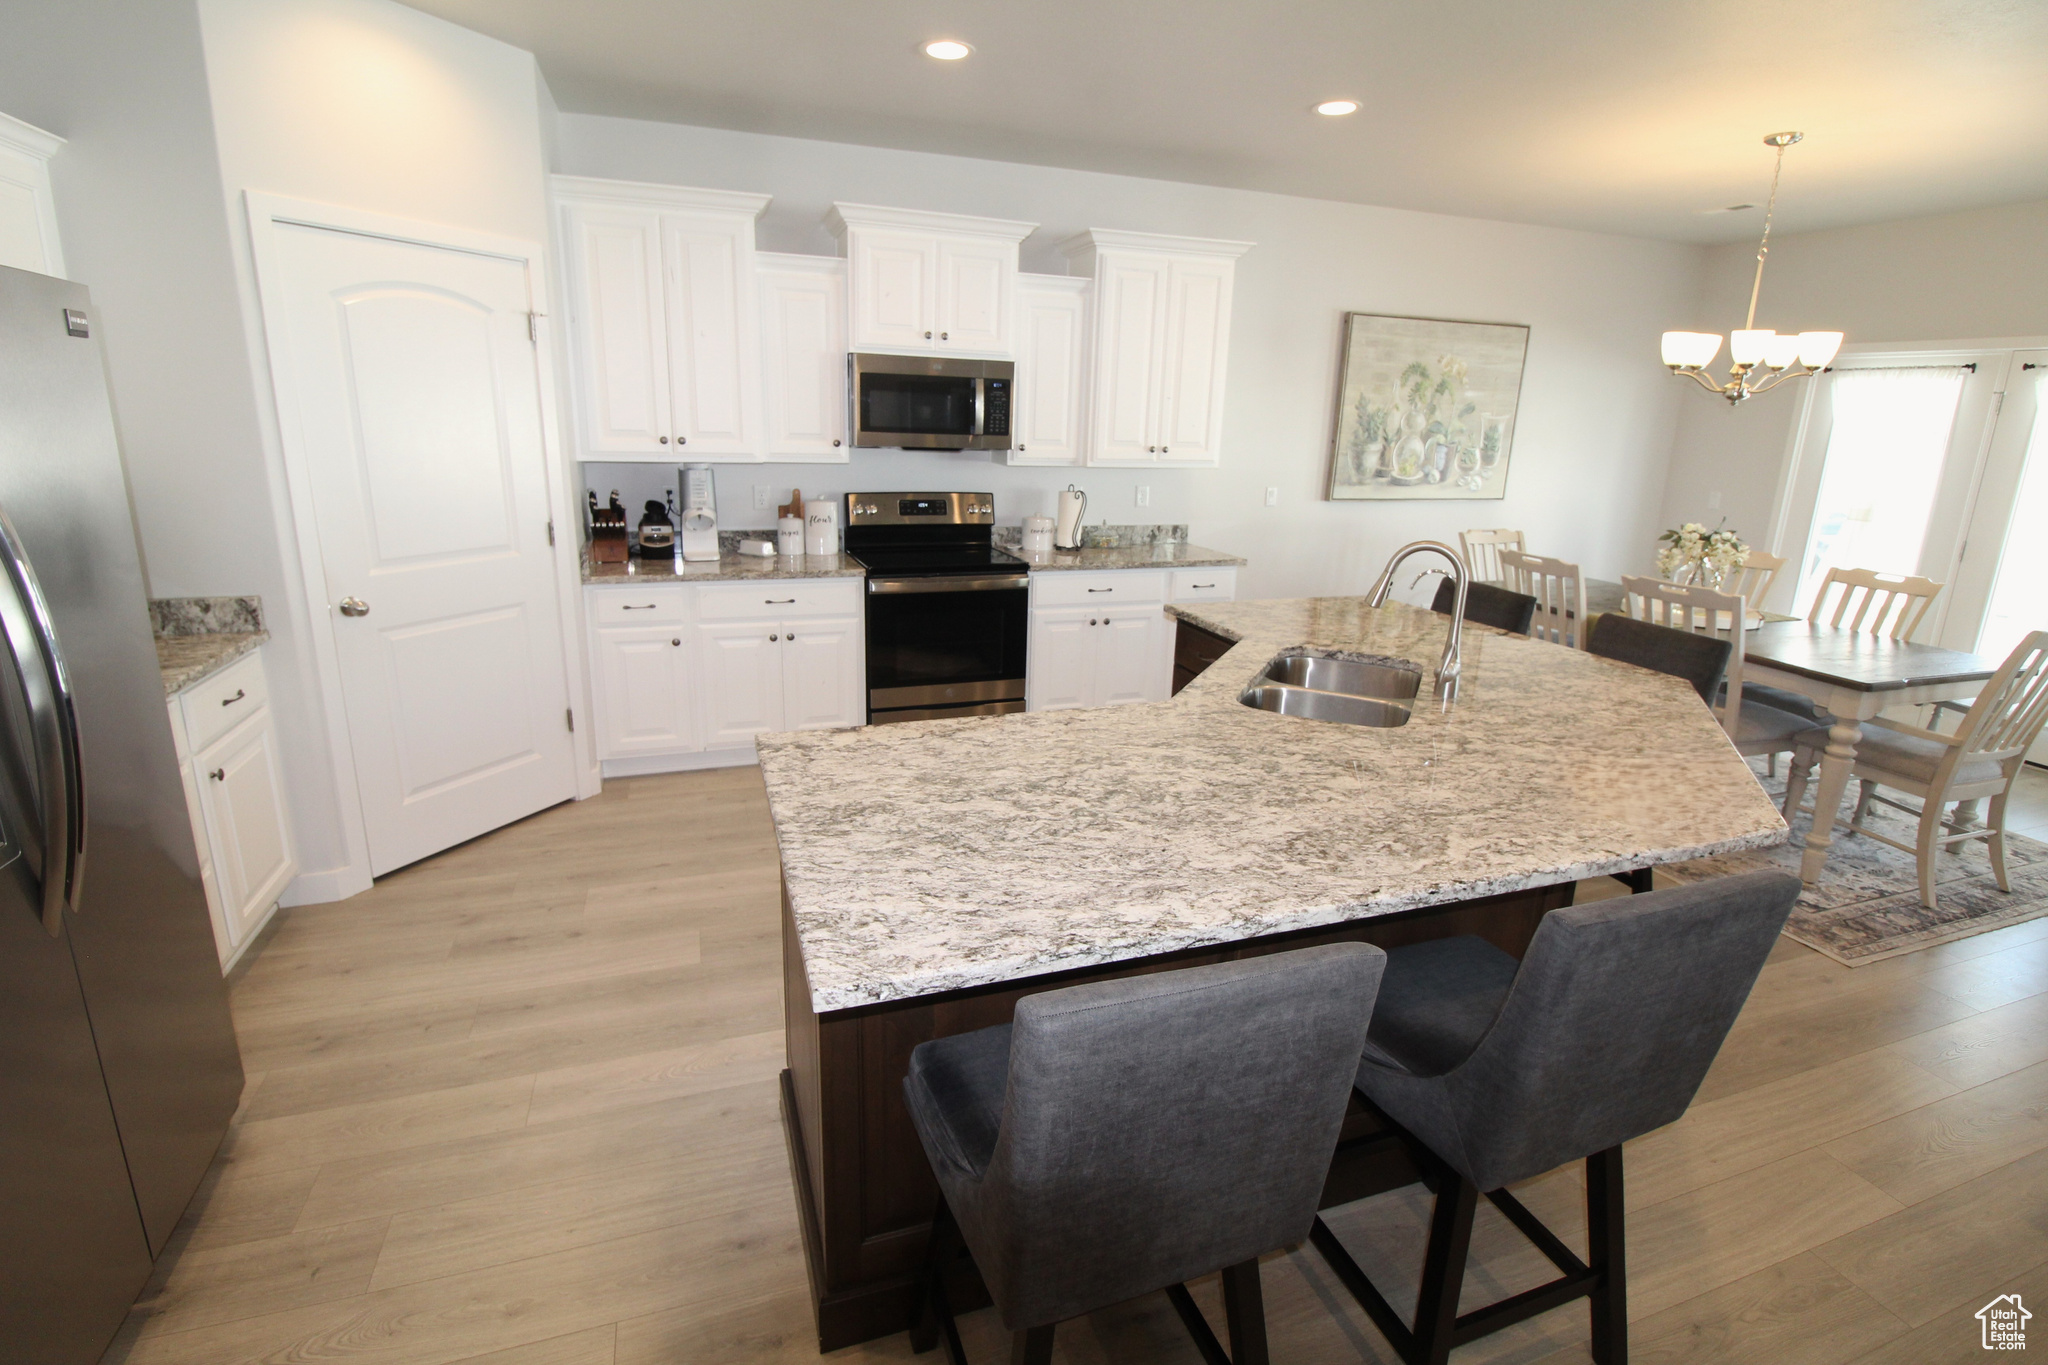 Kitchen with pendant lighting, white cabinets, light wood-type flooring, stainless steel appliances, and sink